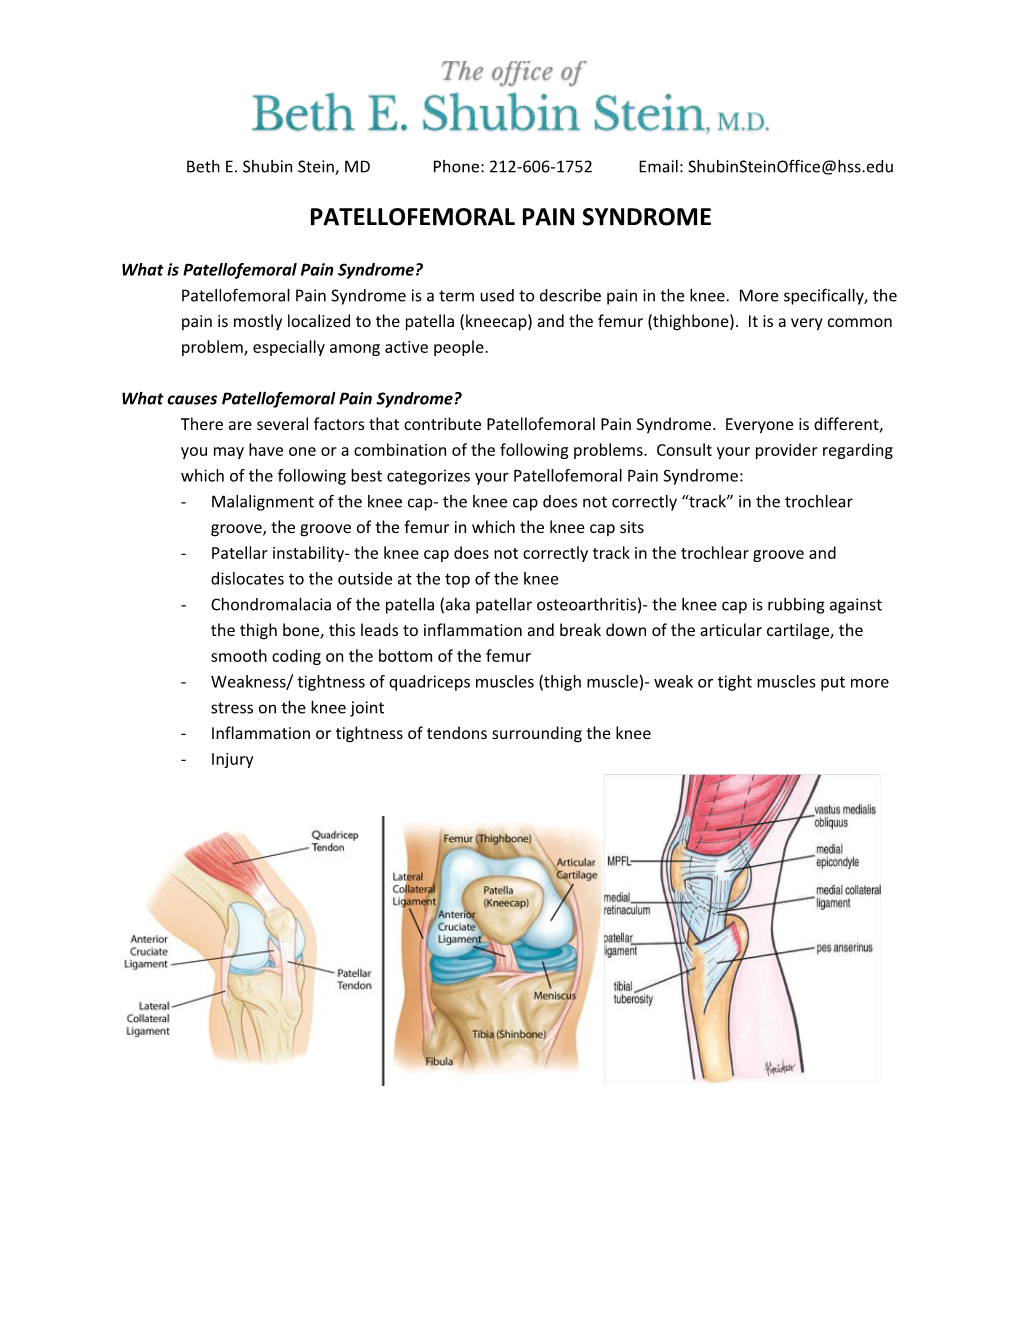 What Is Patellofemoral Pain Syndrome?